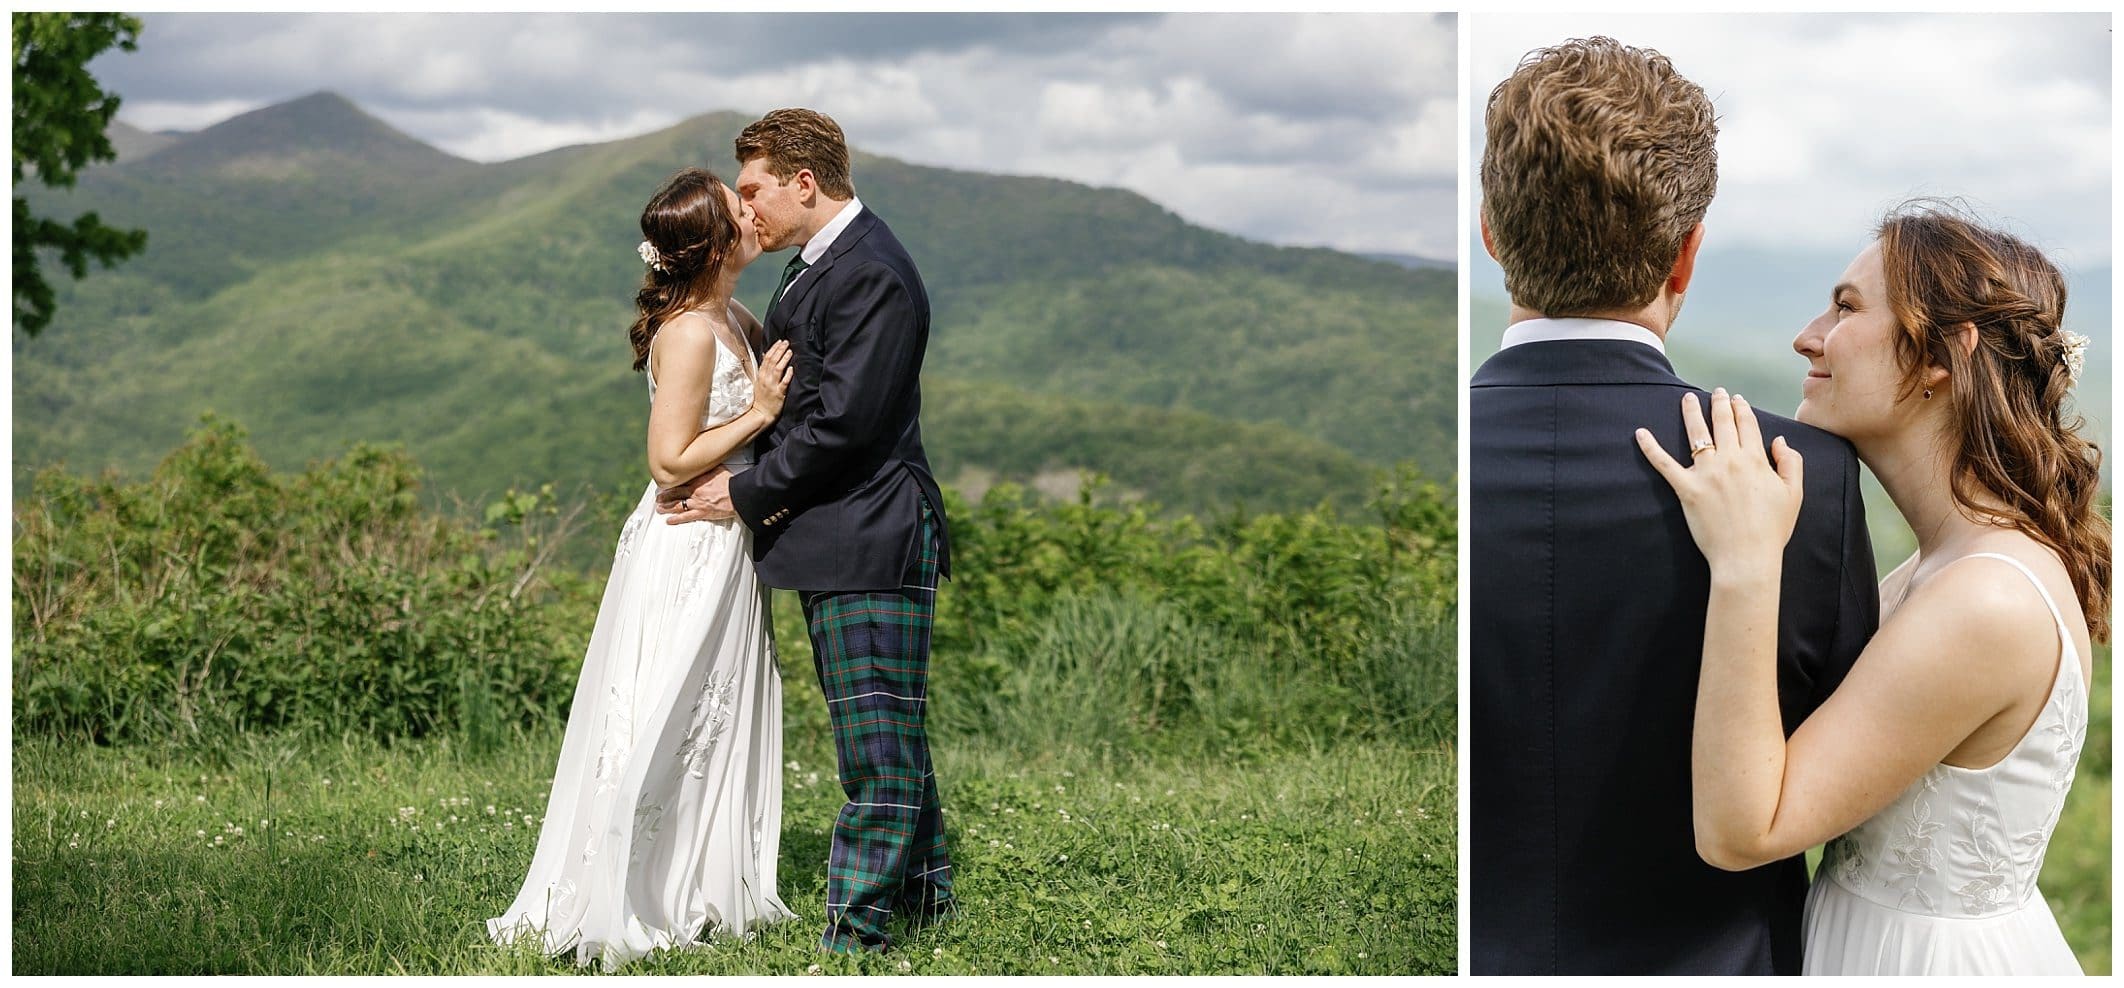 Groom wearing tartan plaid pants with matching tie for wedding reception in Asheville NC. 